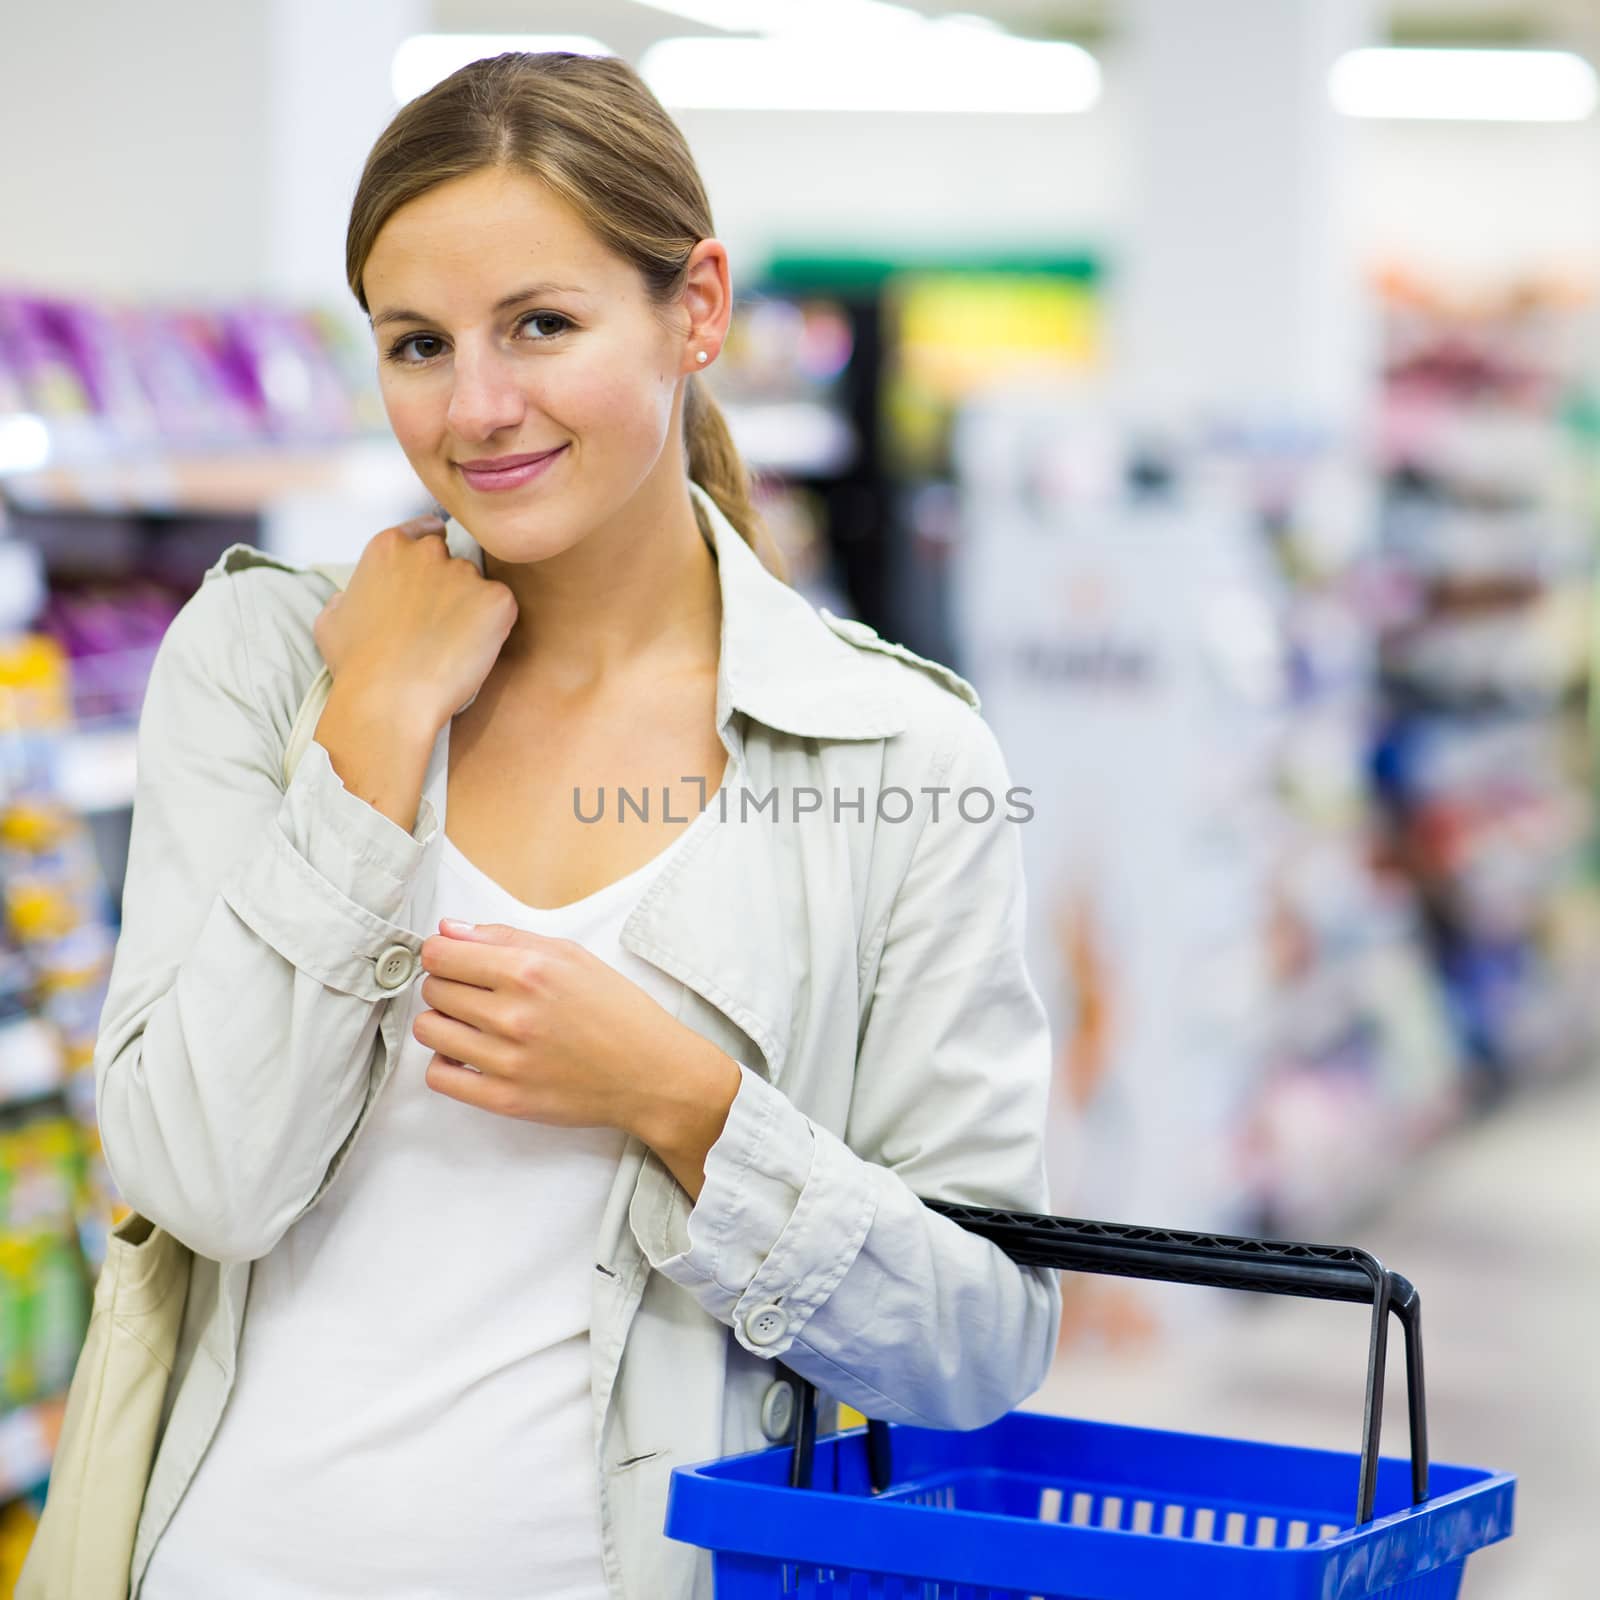 Beautiful young woman shopping in a grocery store/supermarket by viktor_cap